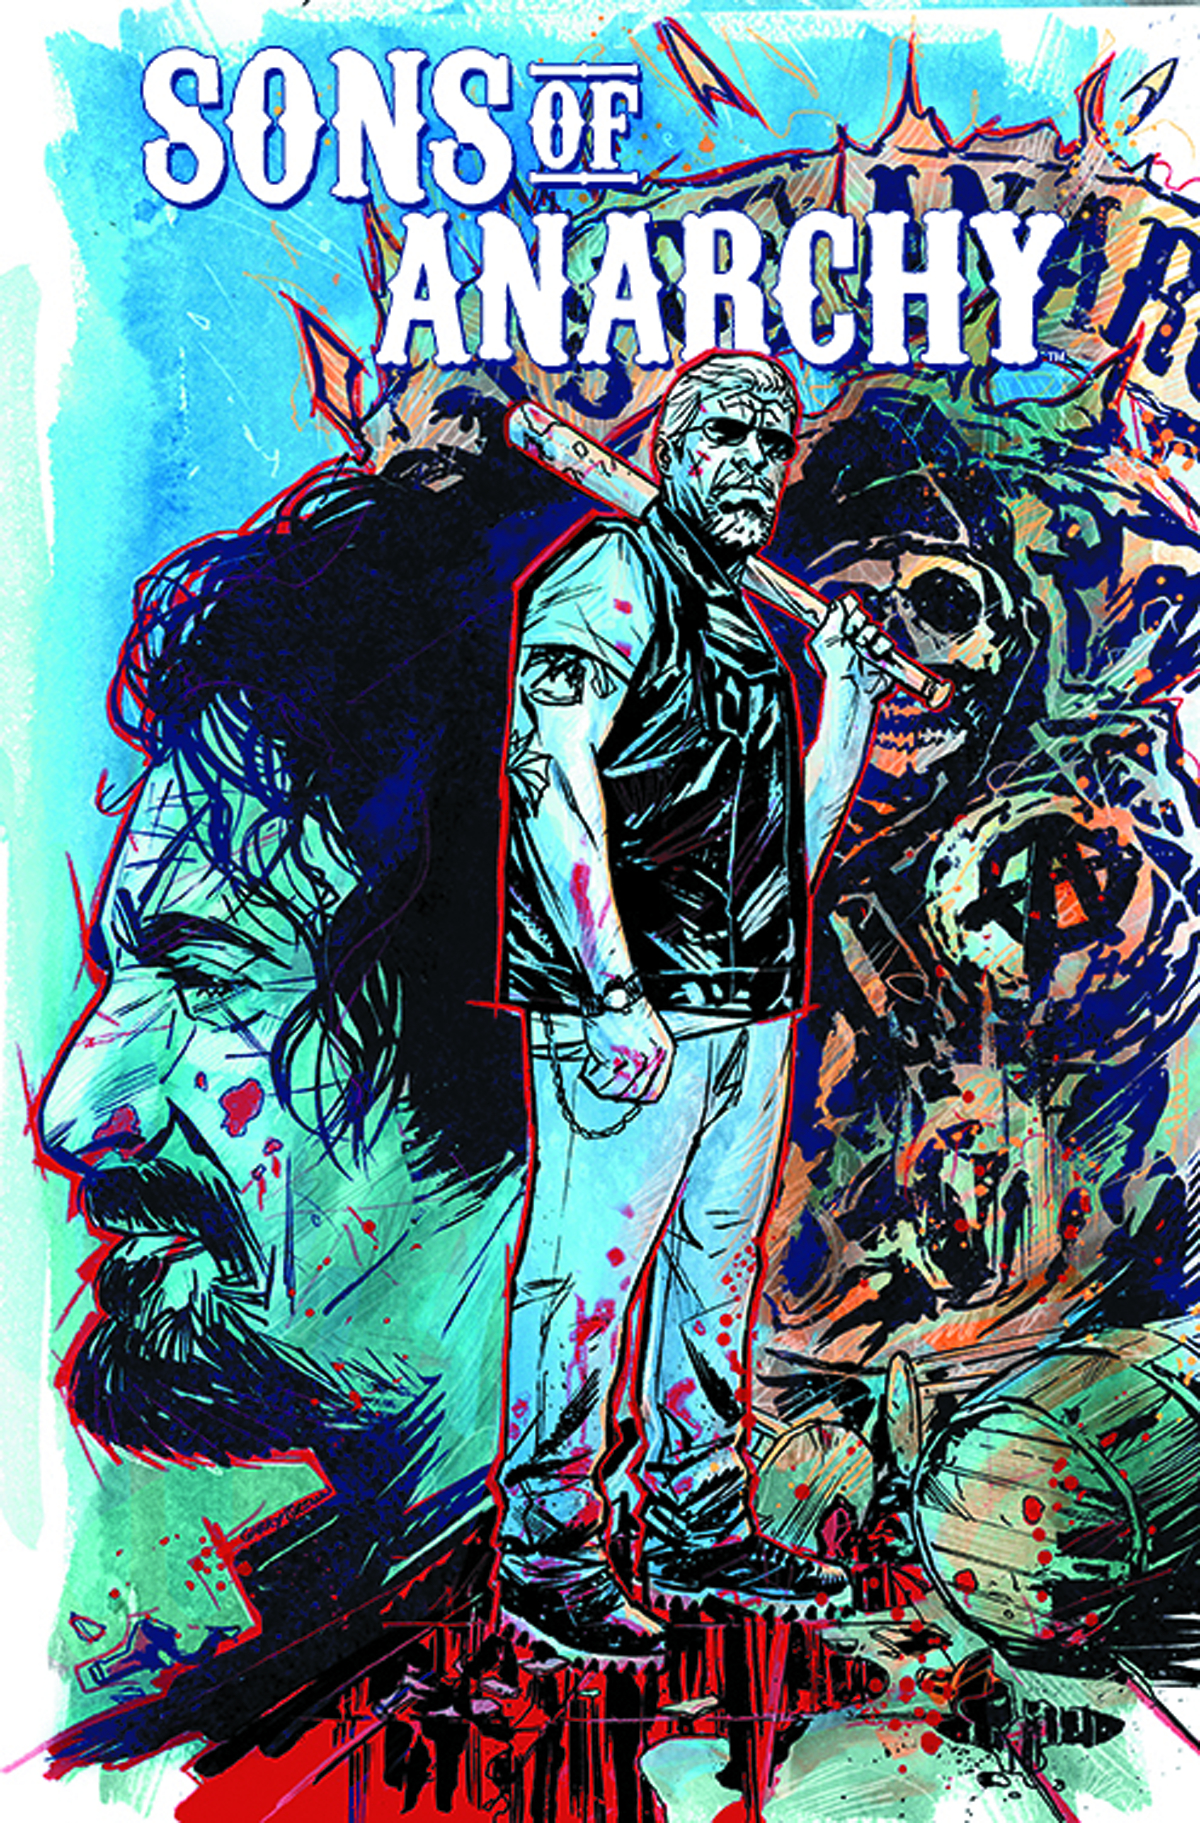 SONS OF ANARCHY #5 (MR)